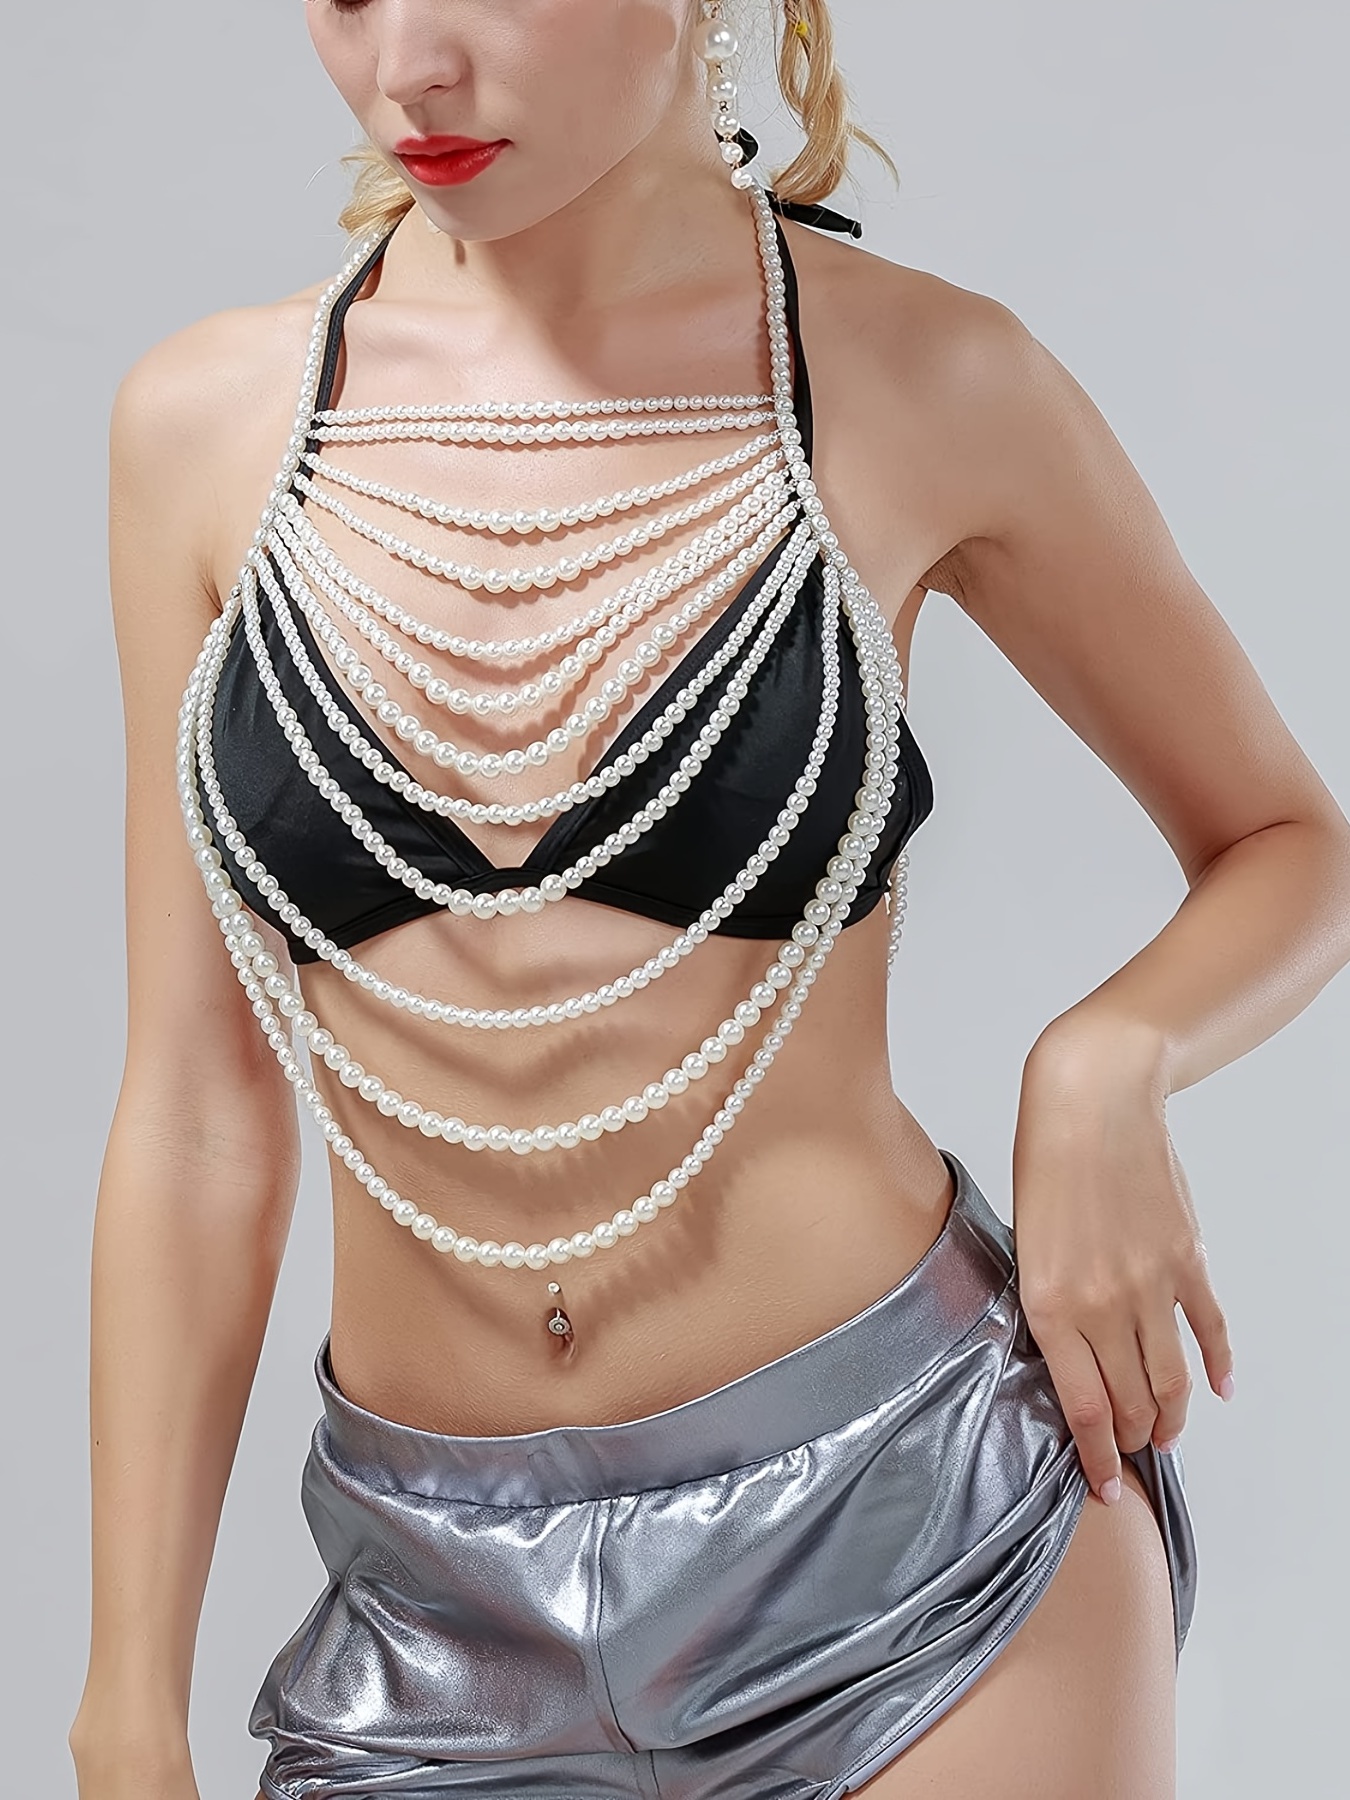 Sexy Imitation-Pearl Top Chest Bra Lingerie Chain Women Summer